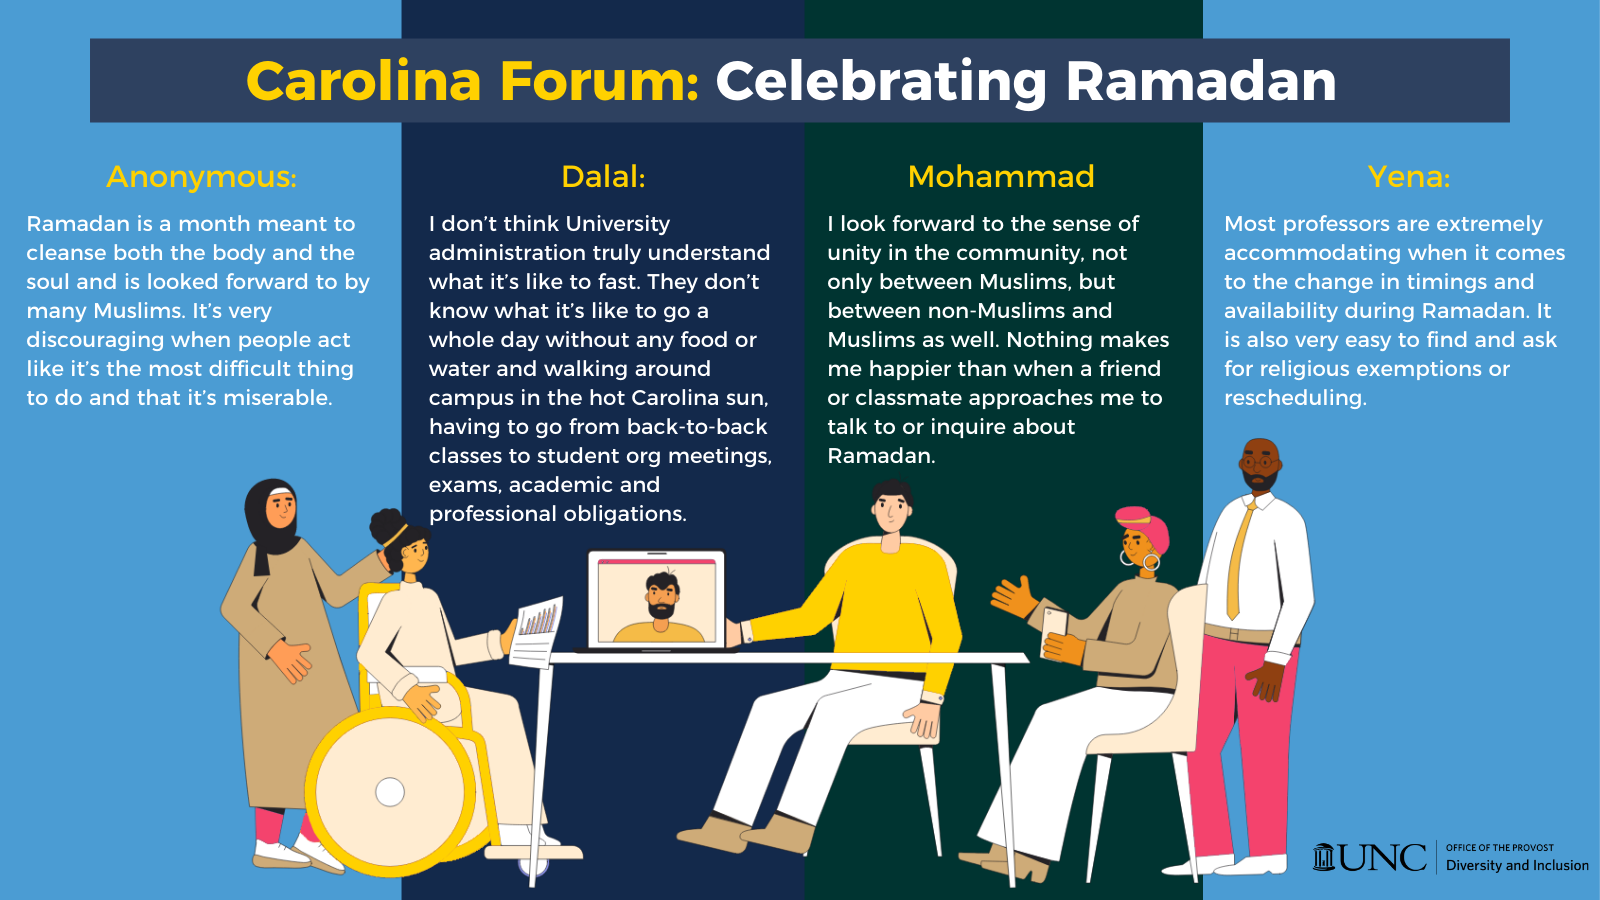 Image of different people standing or sitting in discussion with text saying, "Carolina Forum: Celebrating Ramadan. Anonymous: "Ramadan is a month meant to cleanse both the body and the soula nd is looked forward to by many Muslims. It's very discouraging when people act like it's the most difficult thing to do and that it's miserable." Dalal: "I don't think University administration truly understand what it's like to fast. They don't know what it's like to go a whole day without any food or water and walking around campus in the hot Carolina sun, having to go from back-to-back classes to student org meetings, exams, academic and professional obligations." Mohammad: "I look forward to the sense of unity in the community, not only between Muslims, but between non-Muslims and Muslims as well. Nothing makes me happier than when a friend or classmate approaches me to talk to or inquire about Ramadan." Yena: "Most professors are extremely accomodating when it comes to the change in timings and availability during Ramadan. It is also very easy to find and ask for religious exemptions or rescheduling."